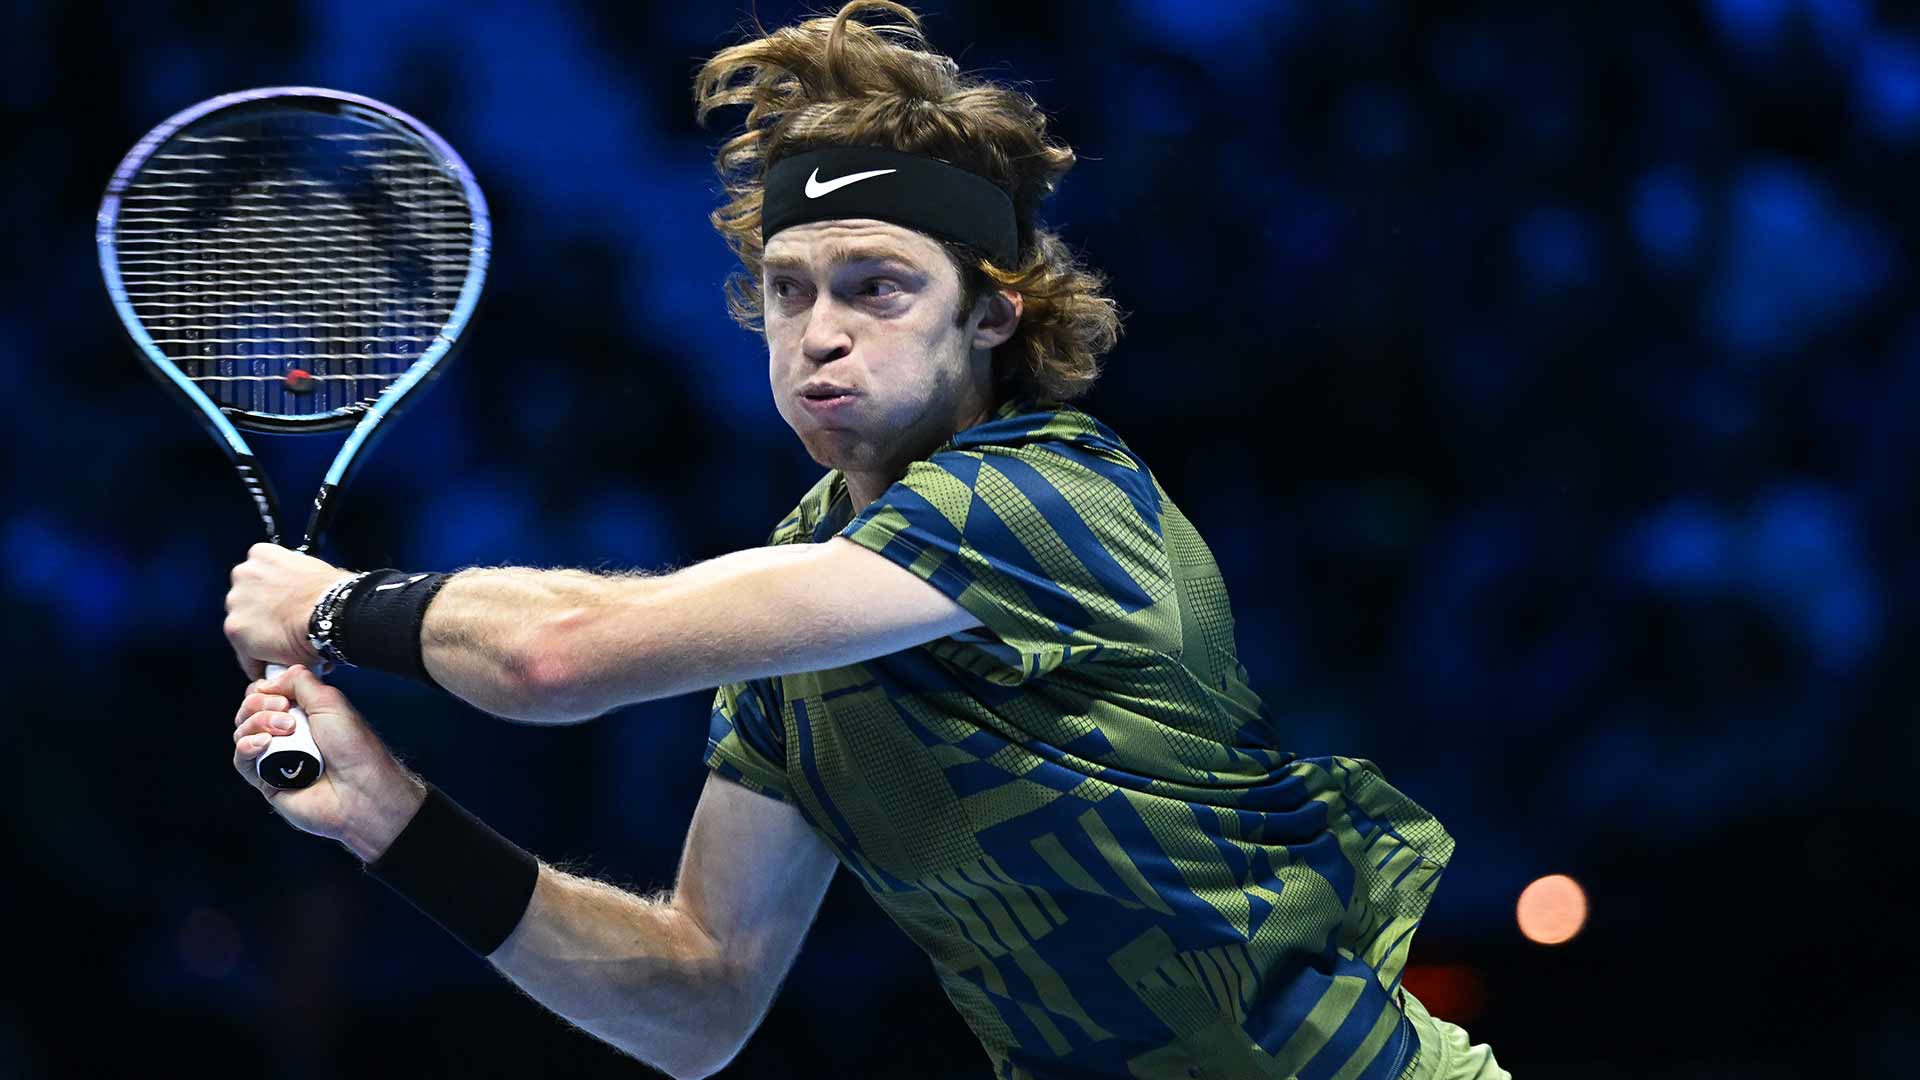 Andrey Rublev is appearing at the season finale for the third consecutive year.